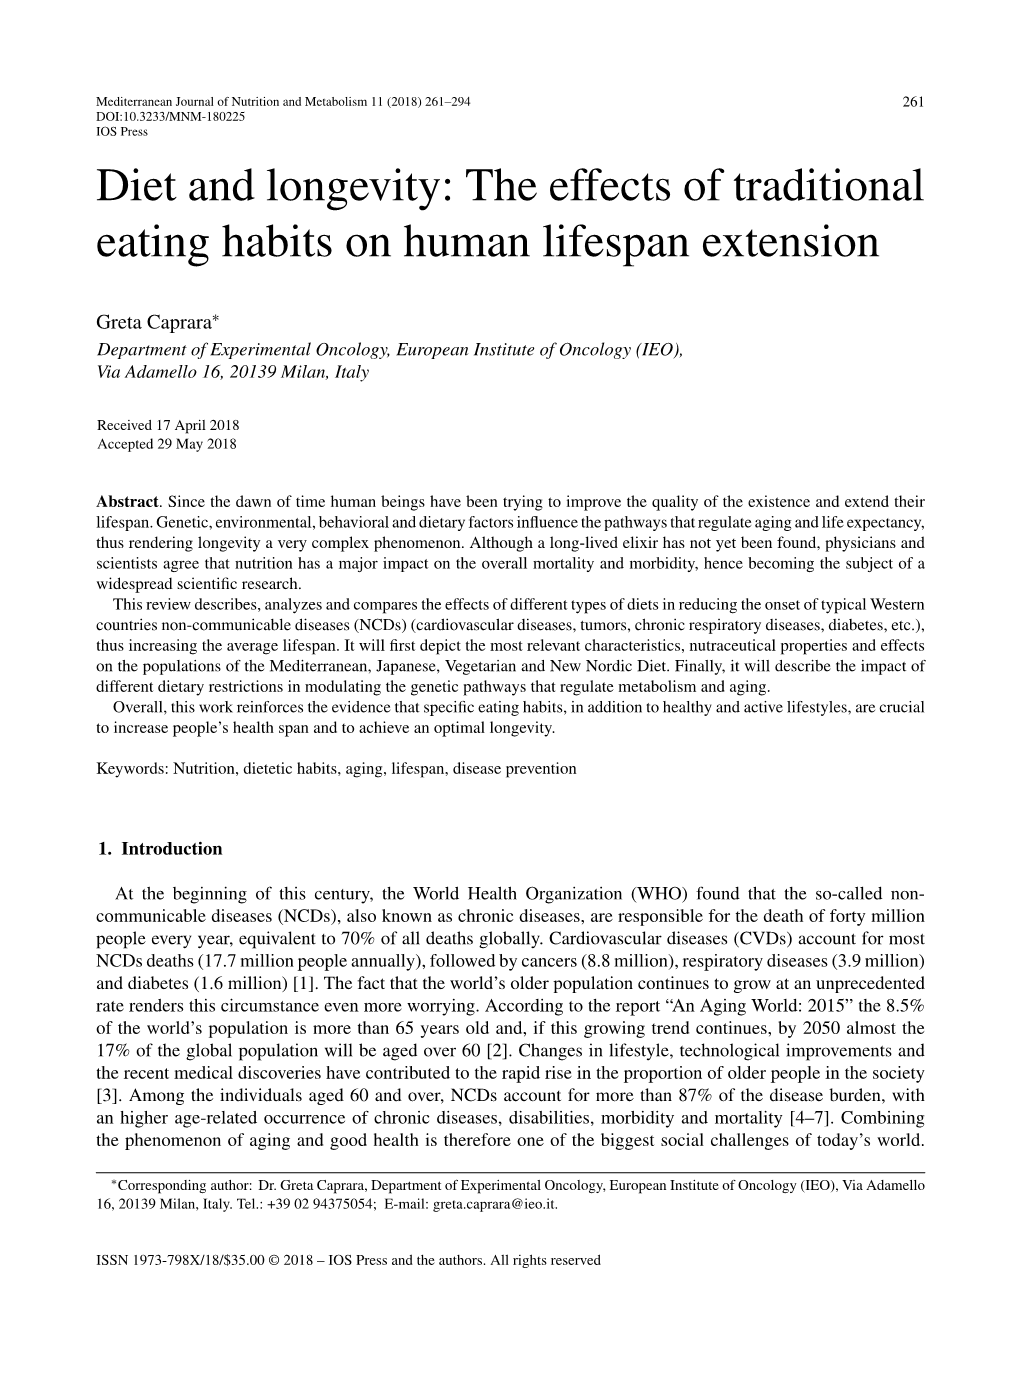 Diet and Longevity: the Effects of Traditional Eating Habits on Human Lifespan Extension